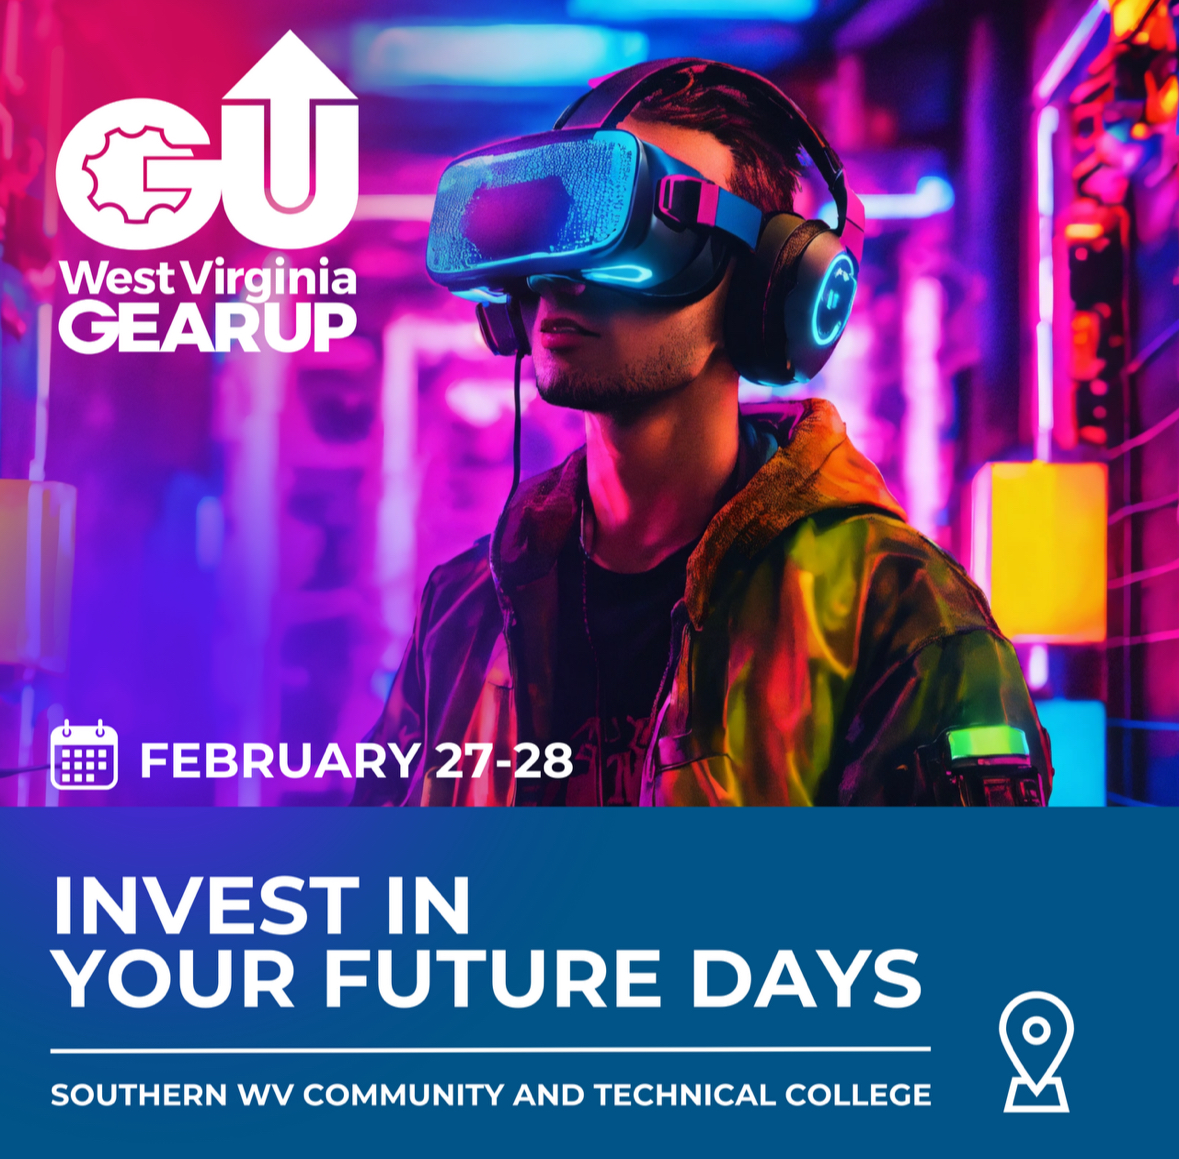 Over the next two days, over 400 9th graders from our southern region will participate in 'Invest in Your Future' days at @SWVCTC. Students will explore career paths and scholarship programs to inspire a successful future 🚀 🎓 #GEARUPworks